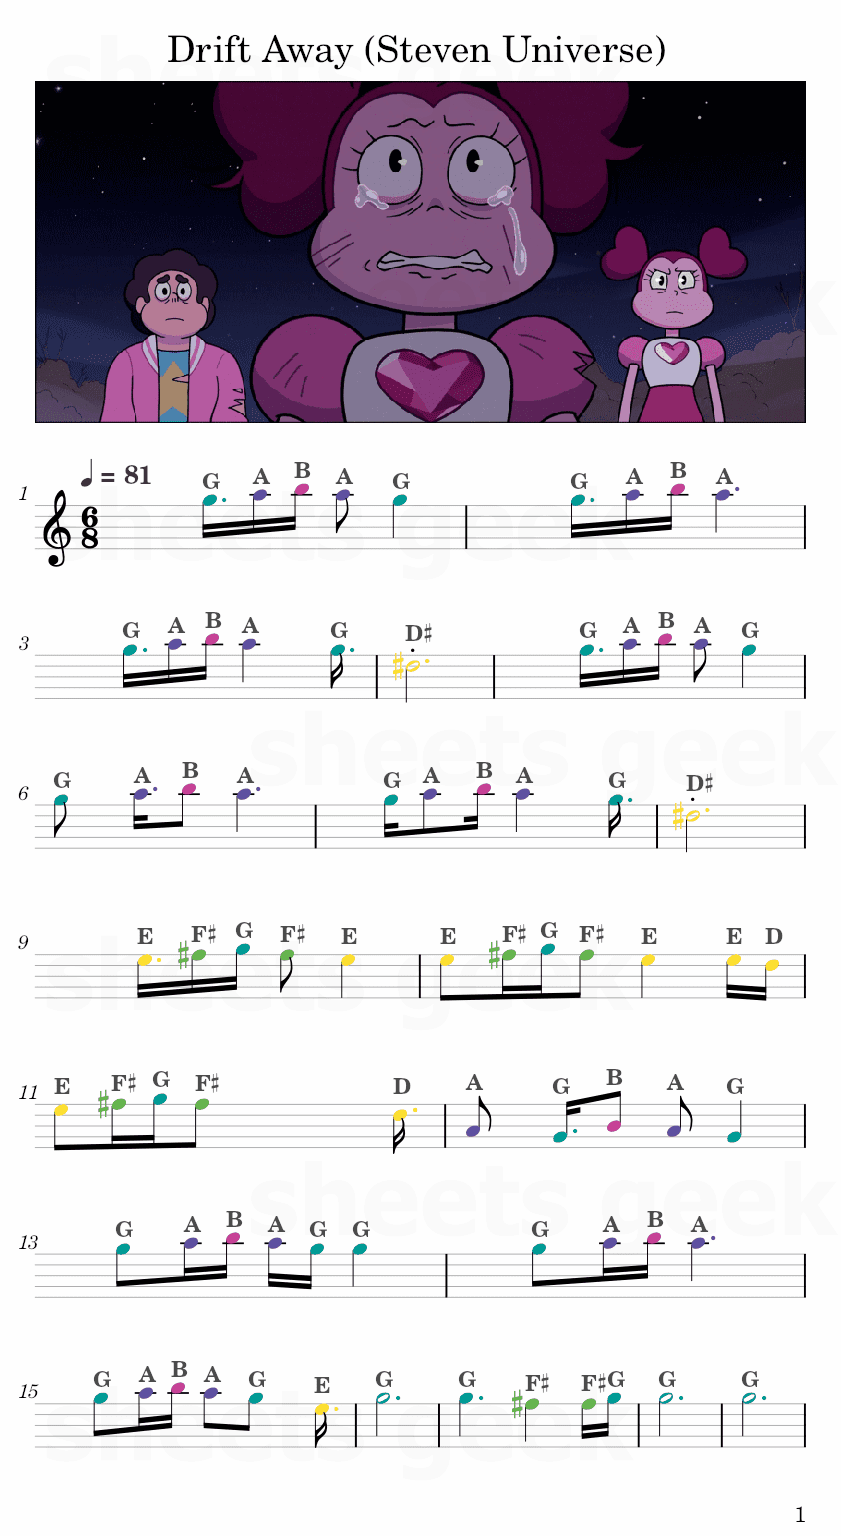 Drift Away Steven Universe Easy Sheet Music Free for piano, keyboard, flute, violin, sax, cello page 1